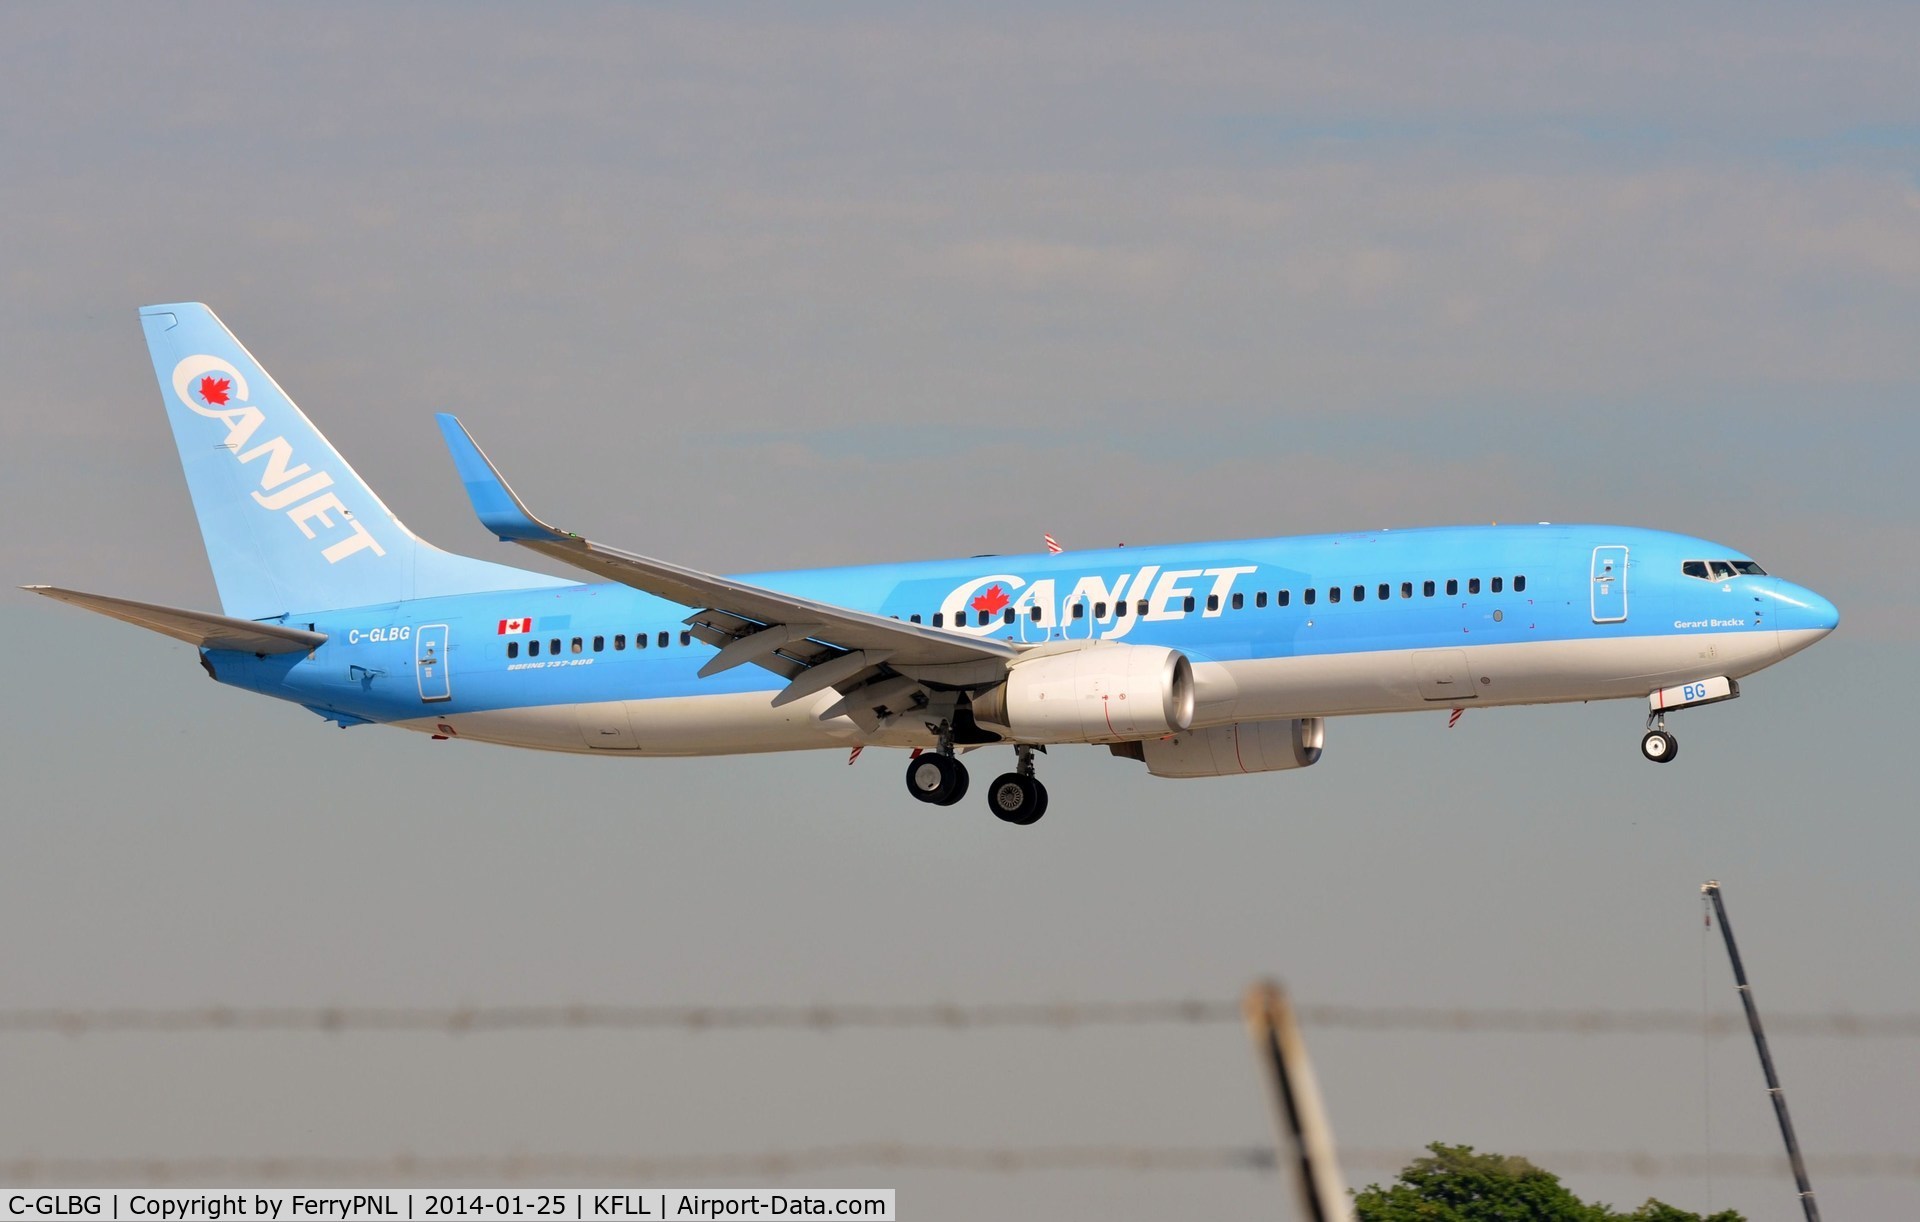 C-GLBG, 2008 Boeing 737-8K5 C/N 35142, Canjet B738 leased from Jetair Belgium for this season